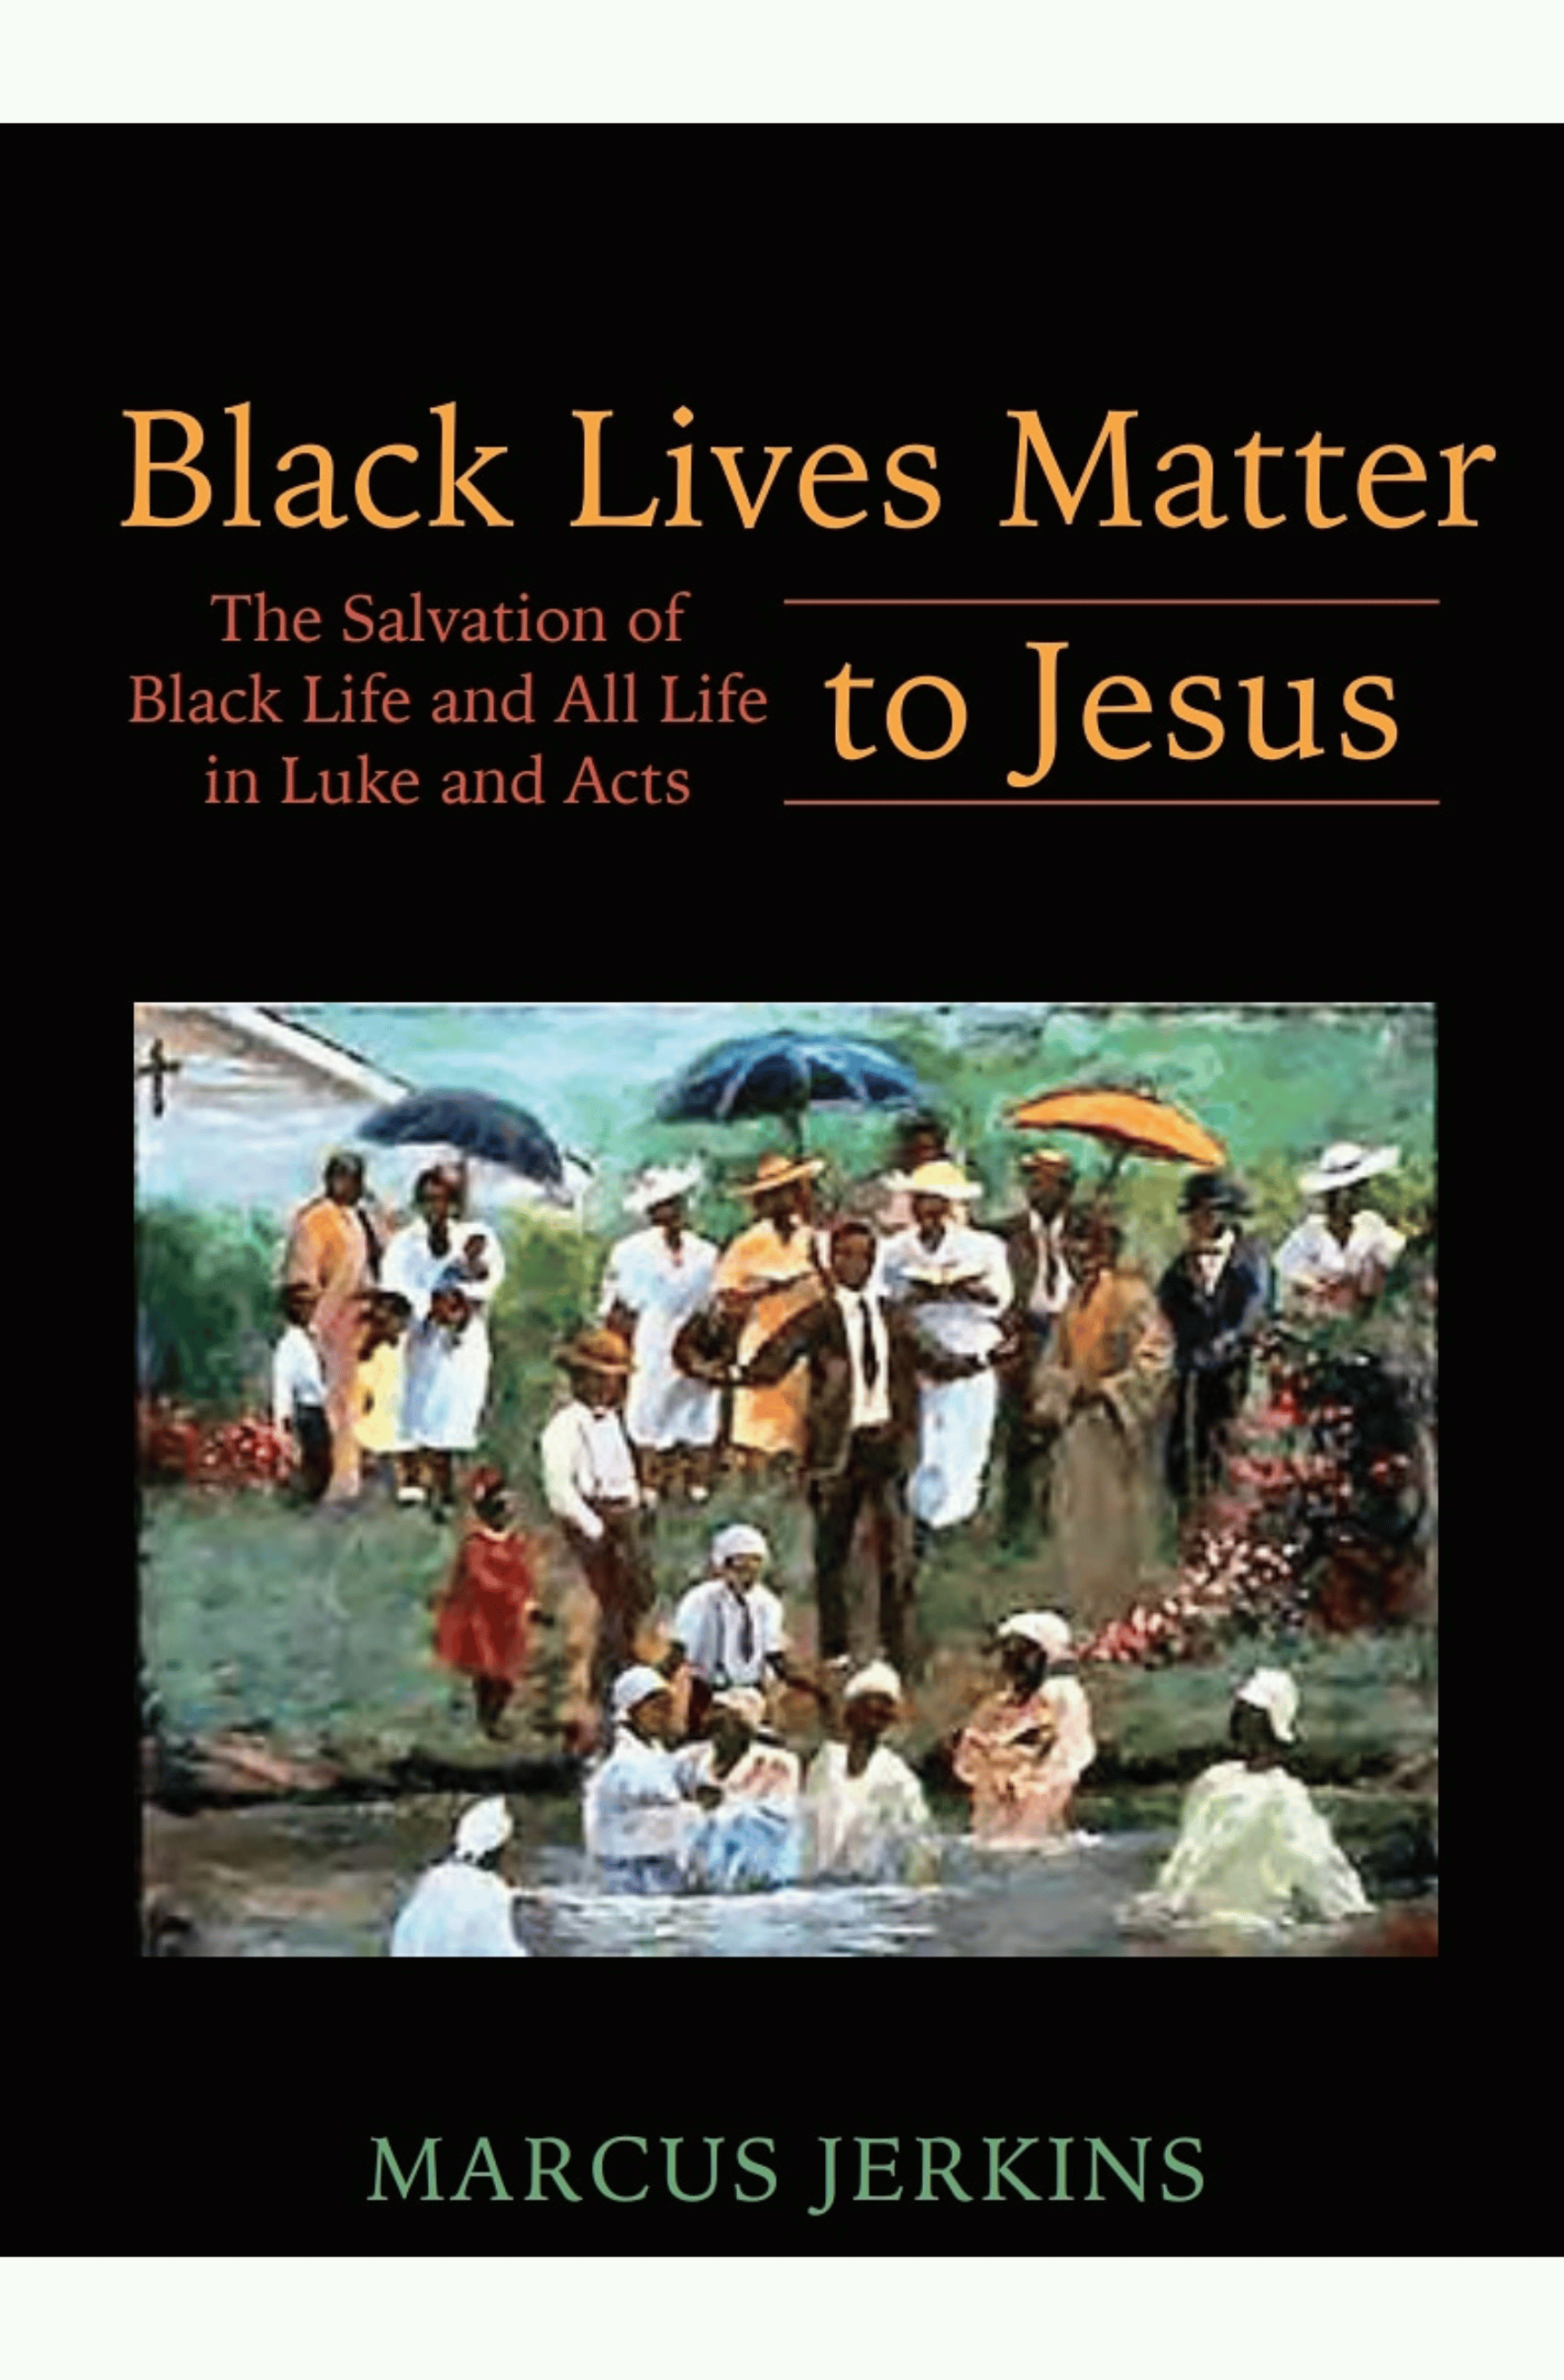 Black Lives Matter to Jesus: The Salvation of Black Life and All Life in Luke and Acts